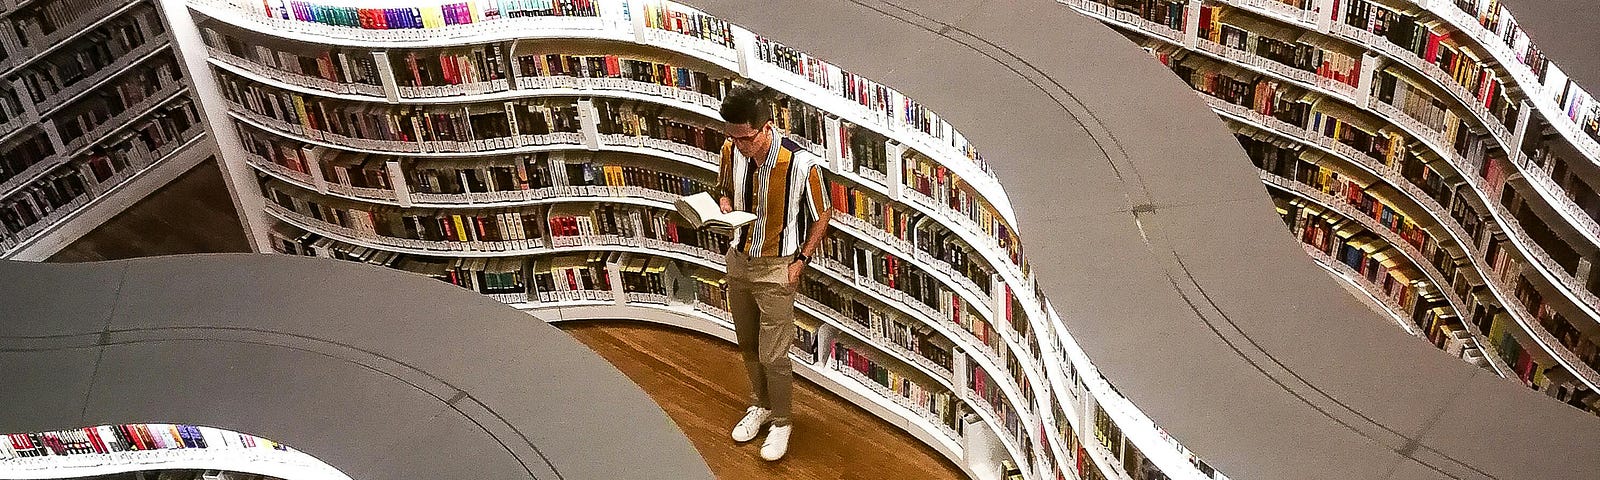 Man reading a book amidst the curving shelves of a library or book shop.